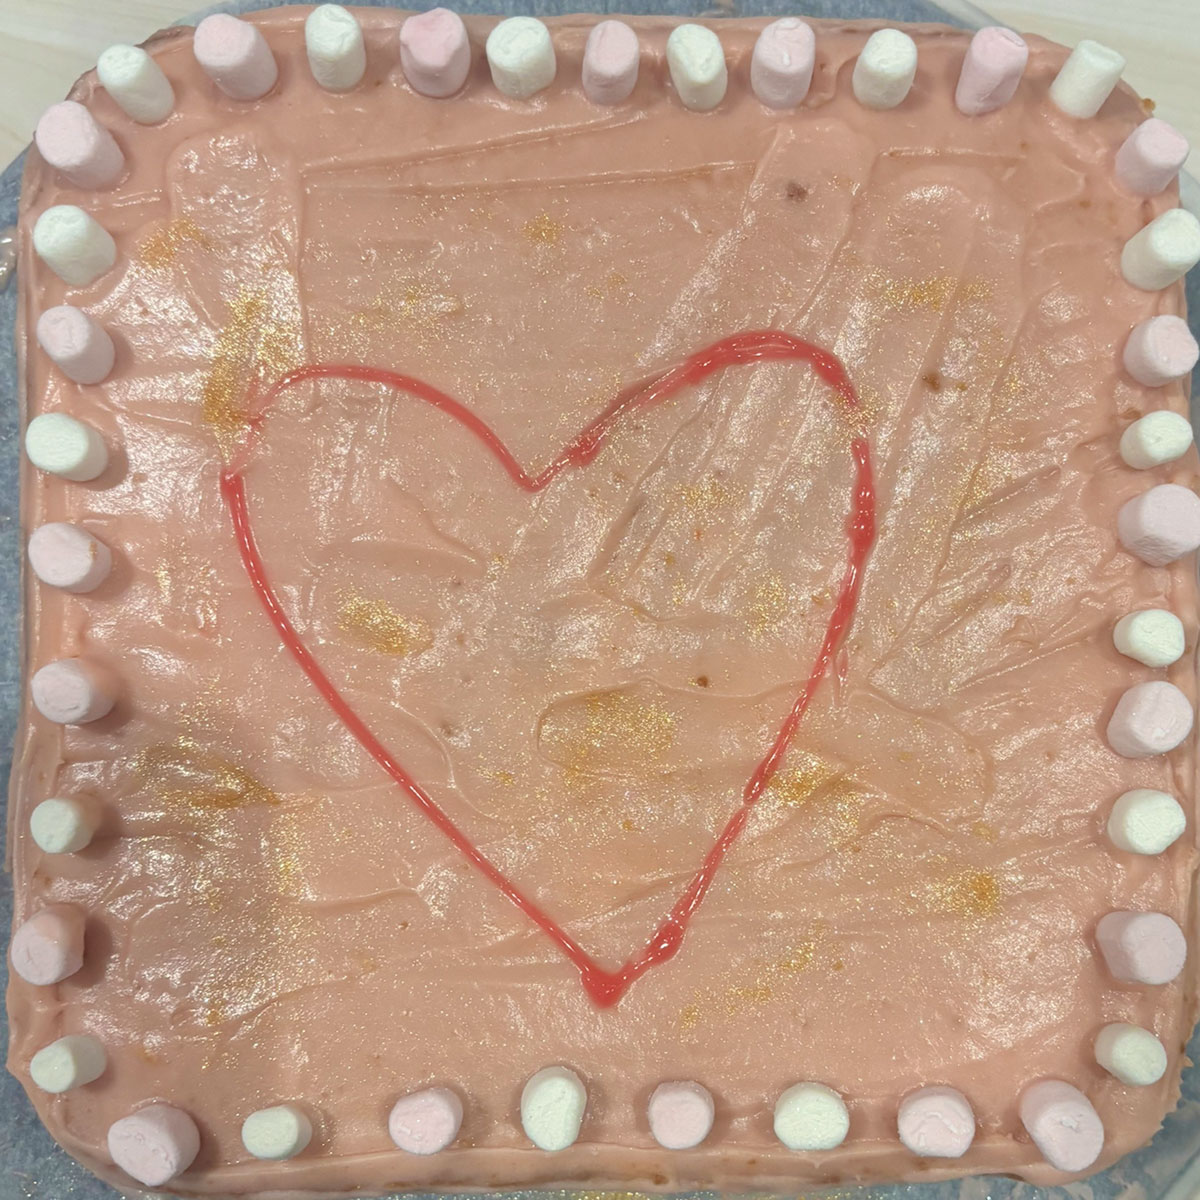 a square cake with brown and gold icing and a red heart in the middle for the ebs cake competition